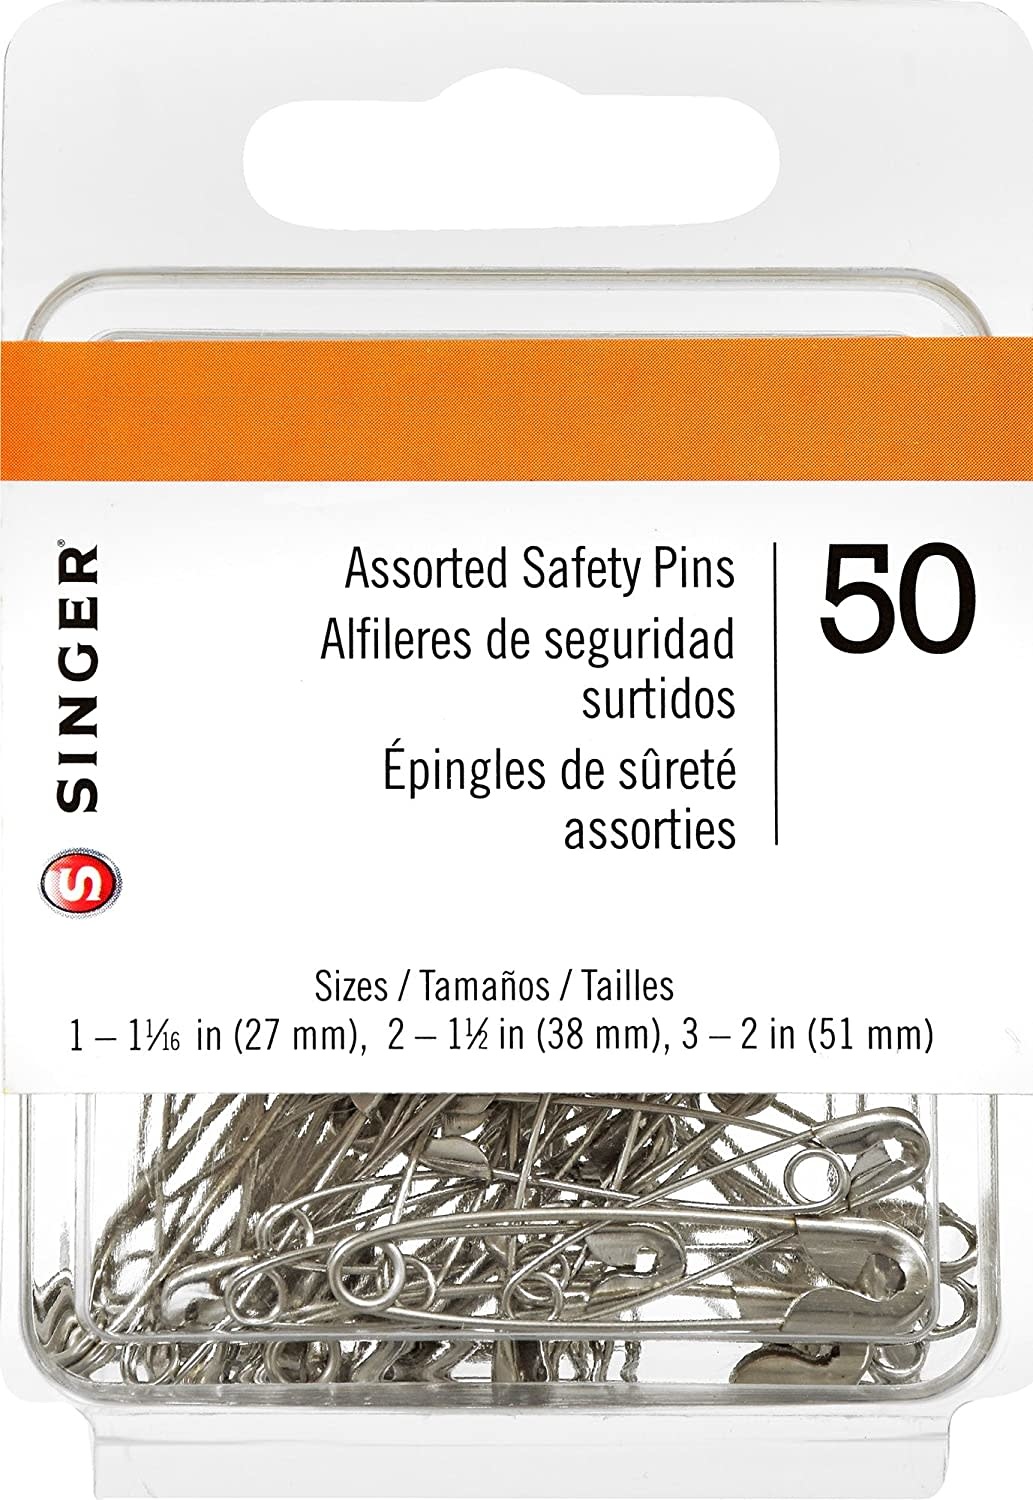  WANDIC Hijab Pins, 50 Pieces Black and White Safety Pins Hijab  Sari Pins Plastic Cover Safety Pins for Safety Locking Adult Clothes Diaper  Scarf Decoration (Rhinestone)